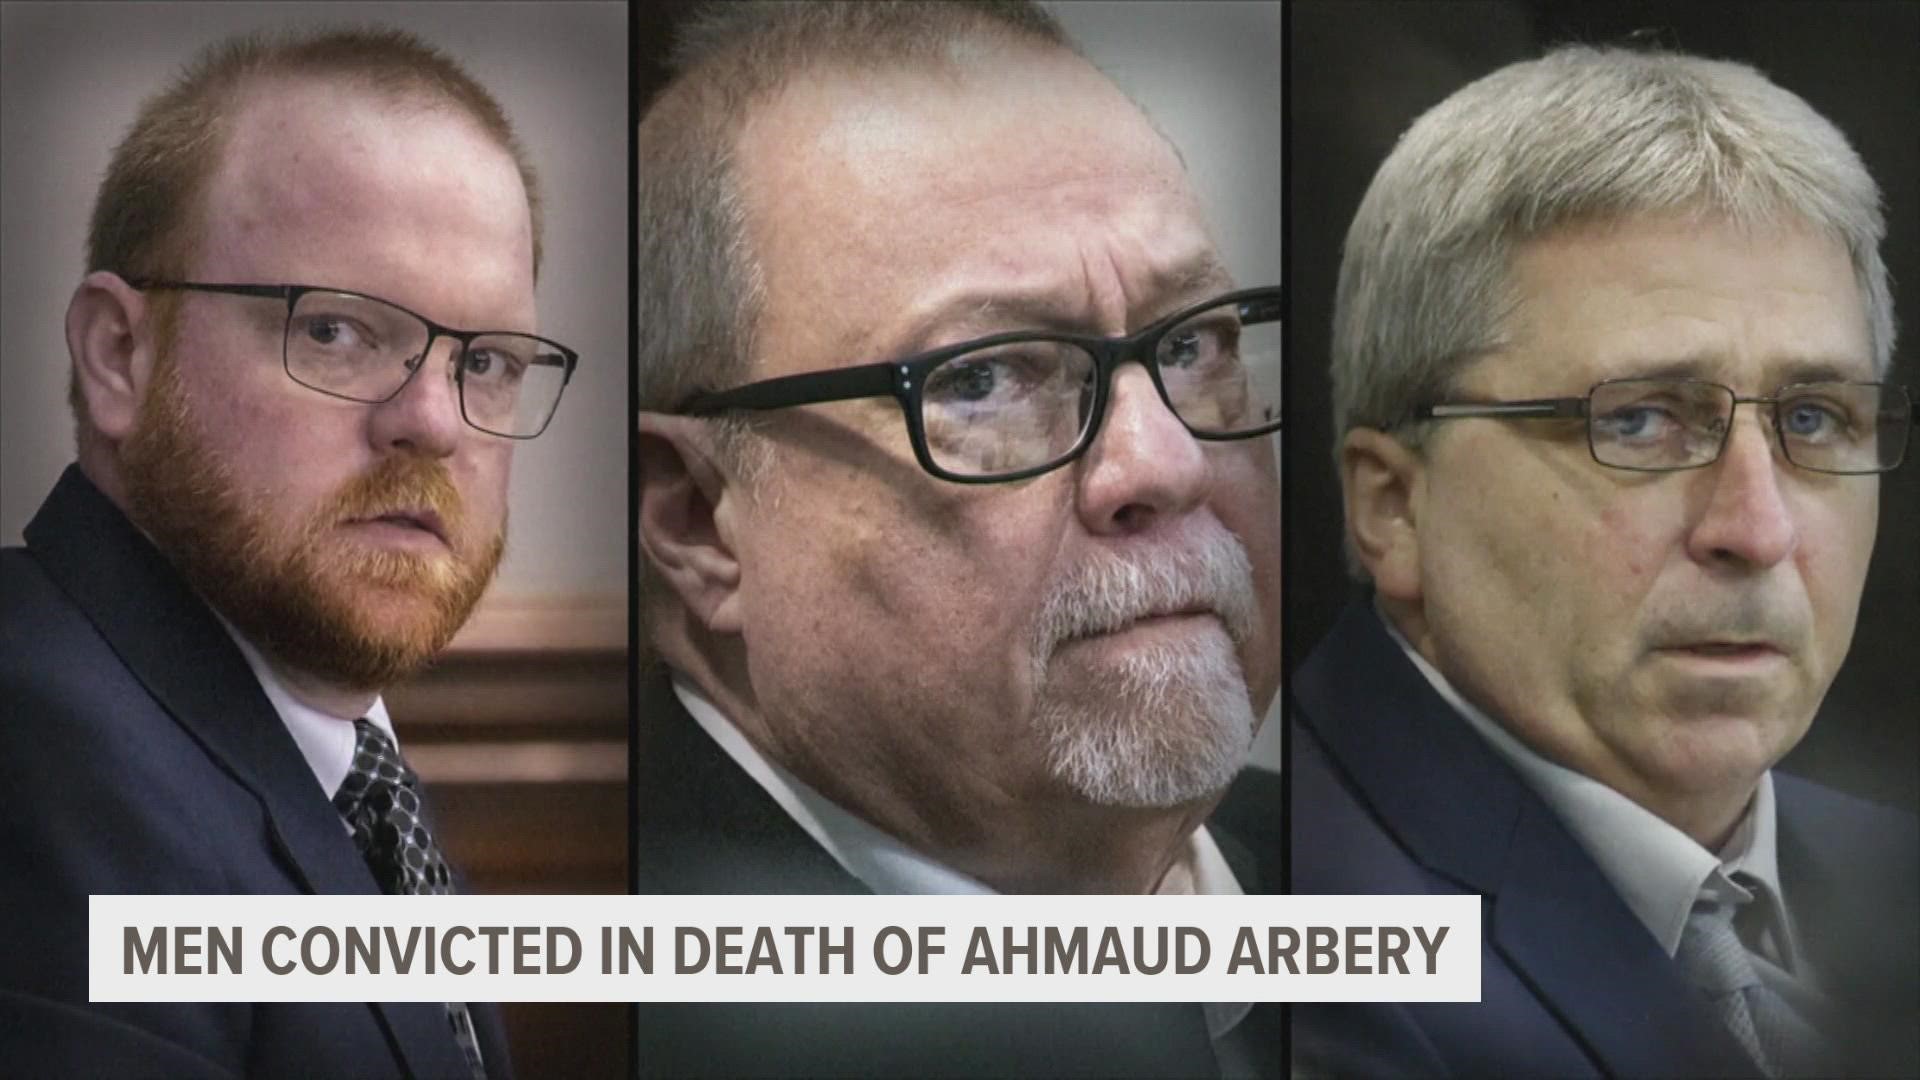 All three men faced malice murder, four counts of felony murder, two counts of aggravated assault, false imprisonment, and criminal attempt charges.